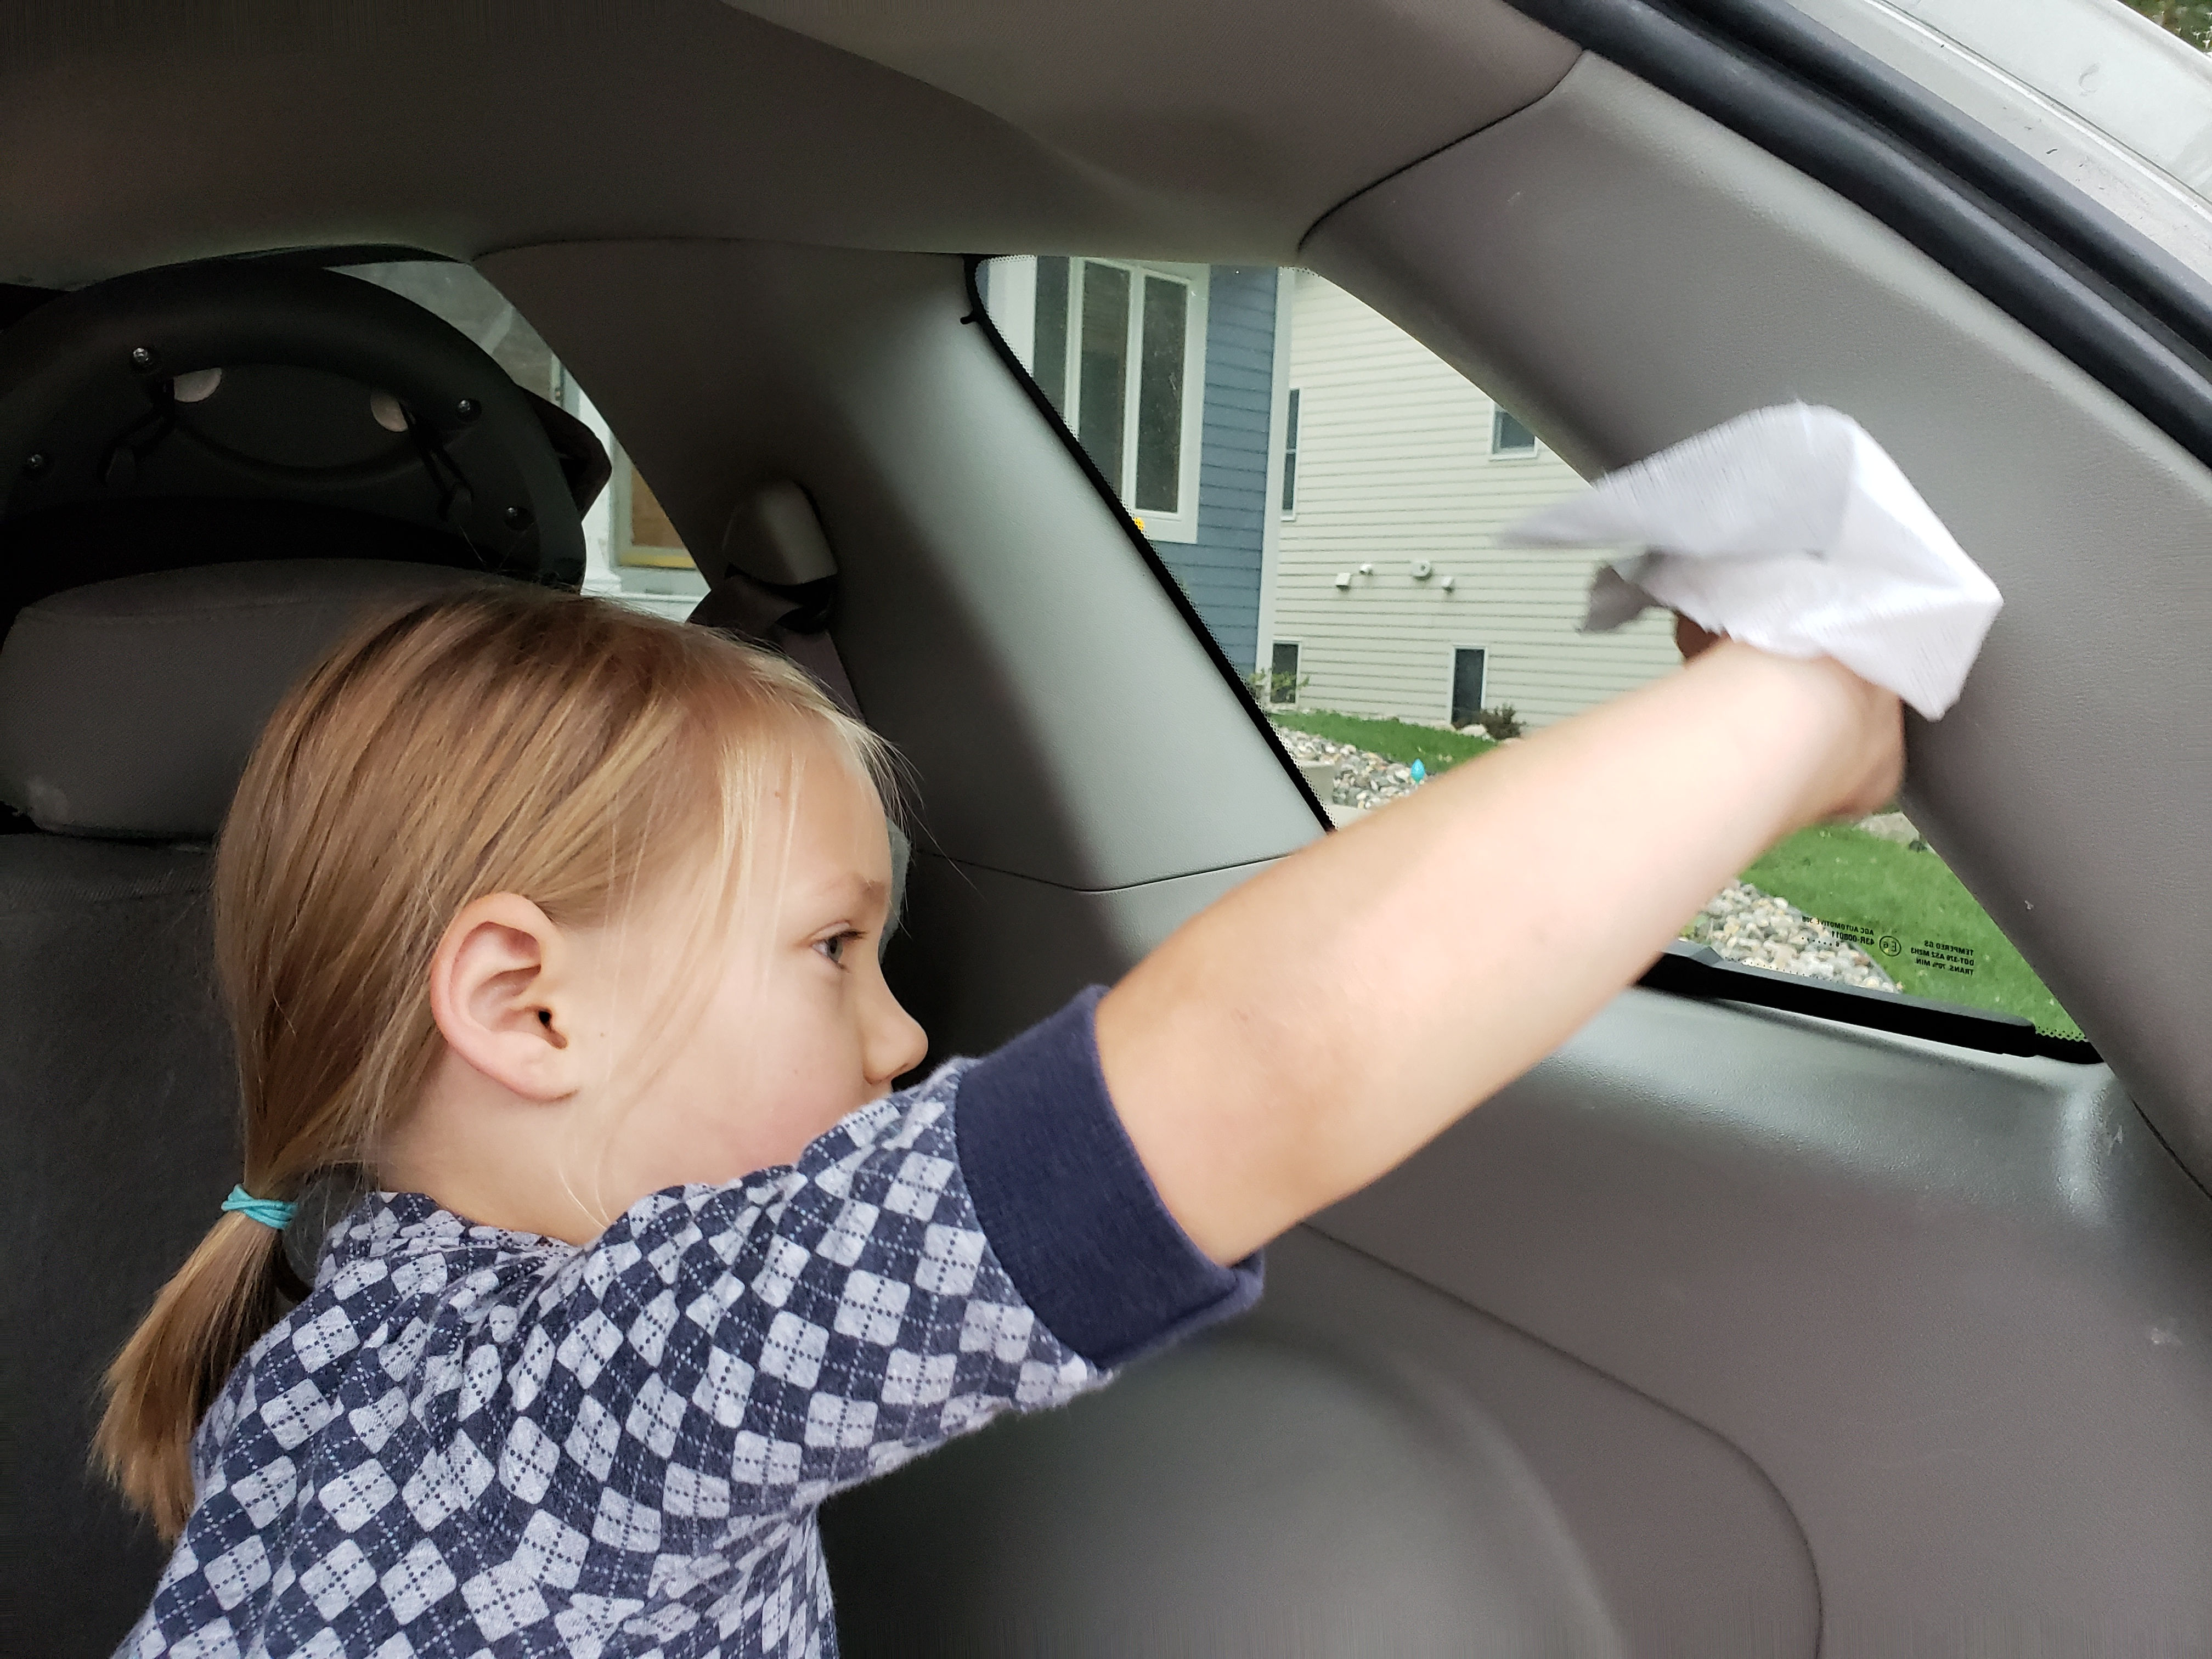 https://exploringdomesticity.com/wp-content/uploads/2019/09/Mom-car-cleaning-easy-wipes-and-getting-kids-to-help.jpg